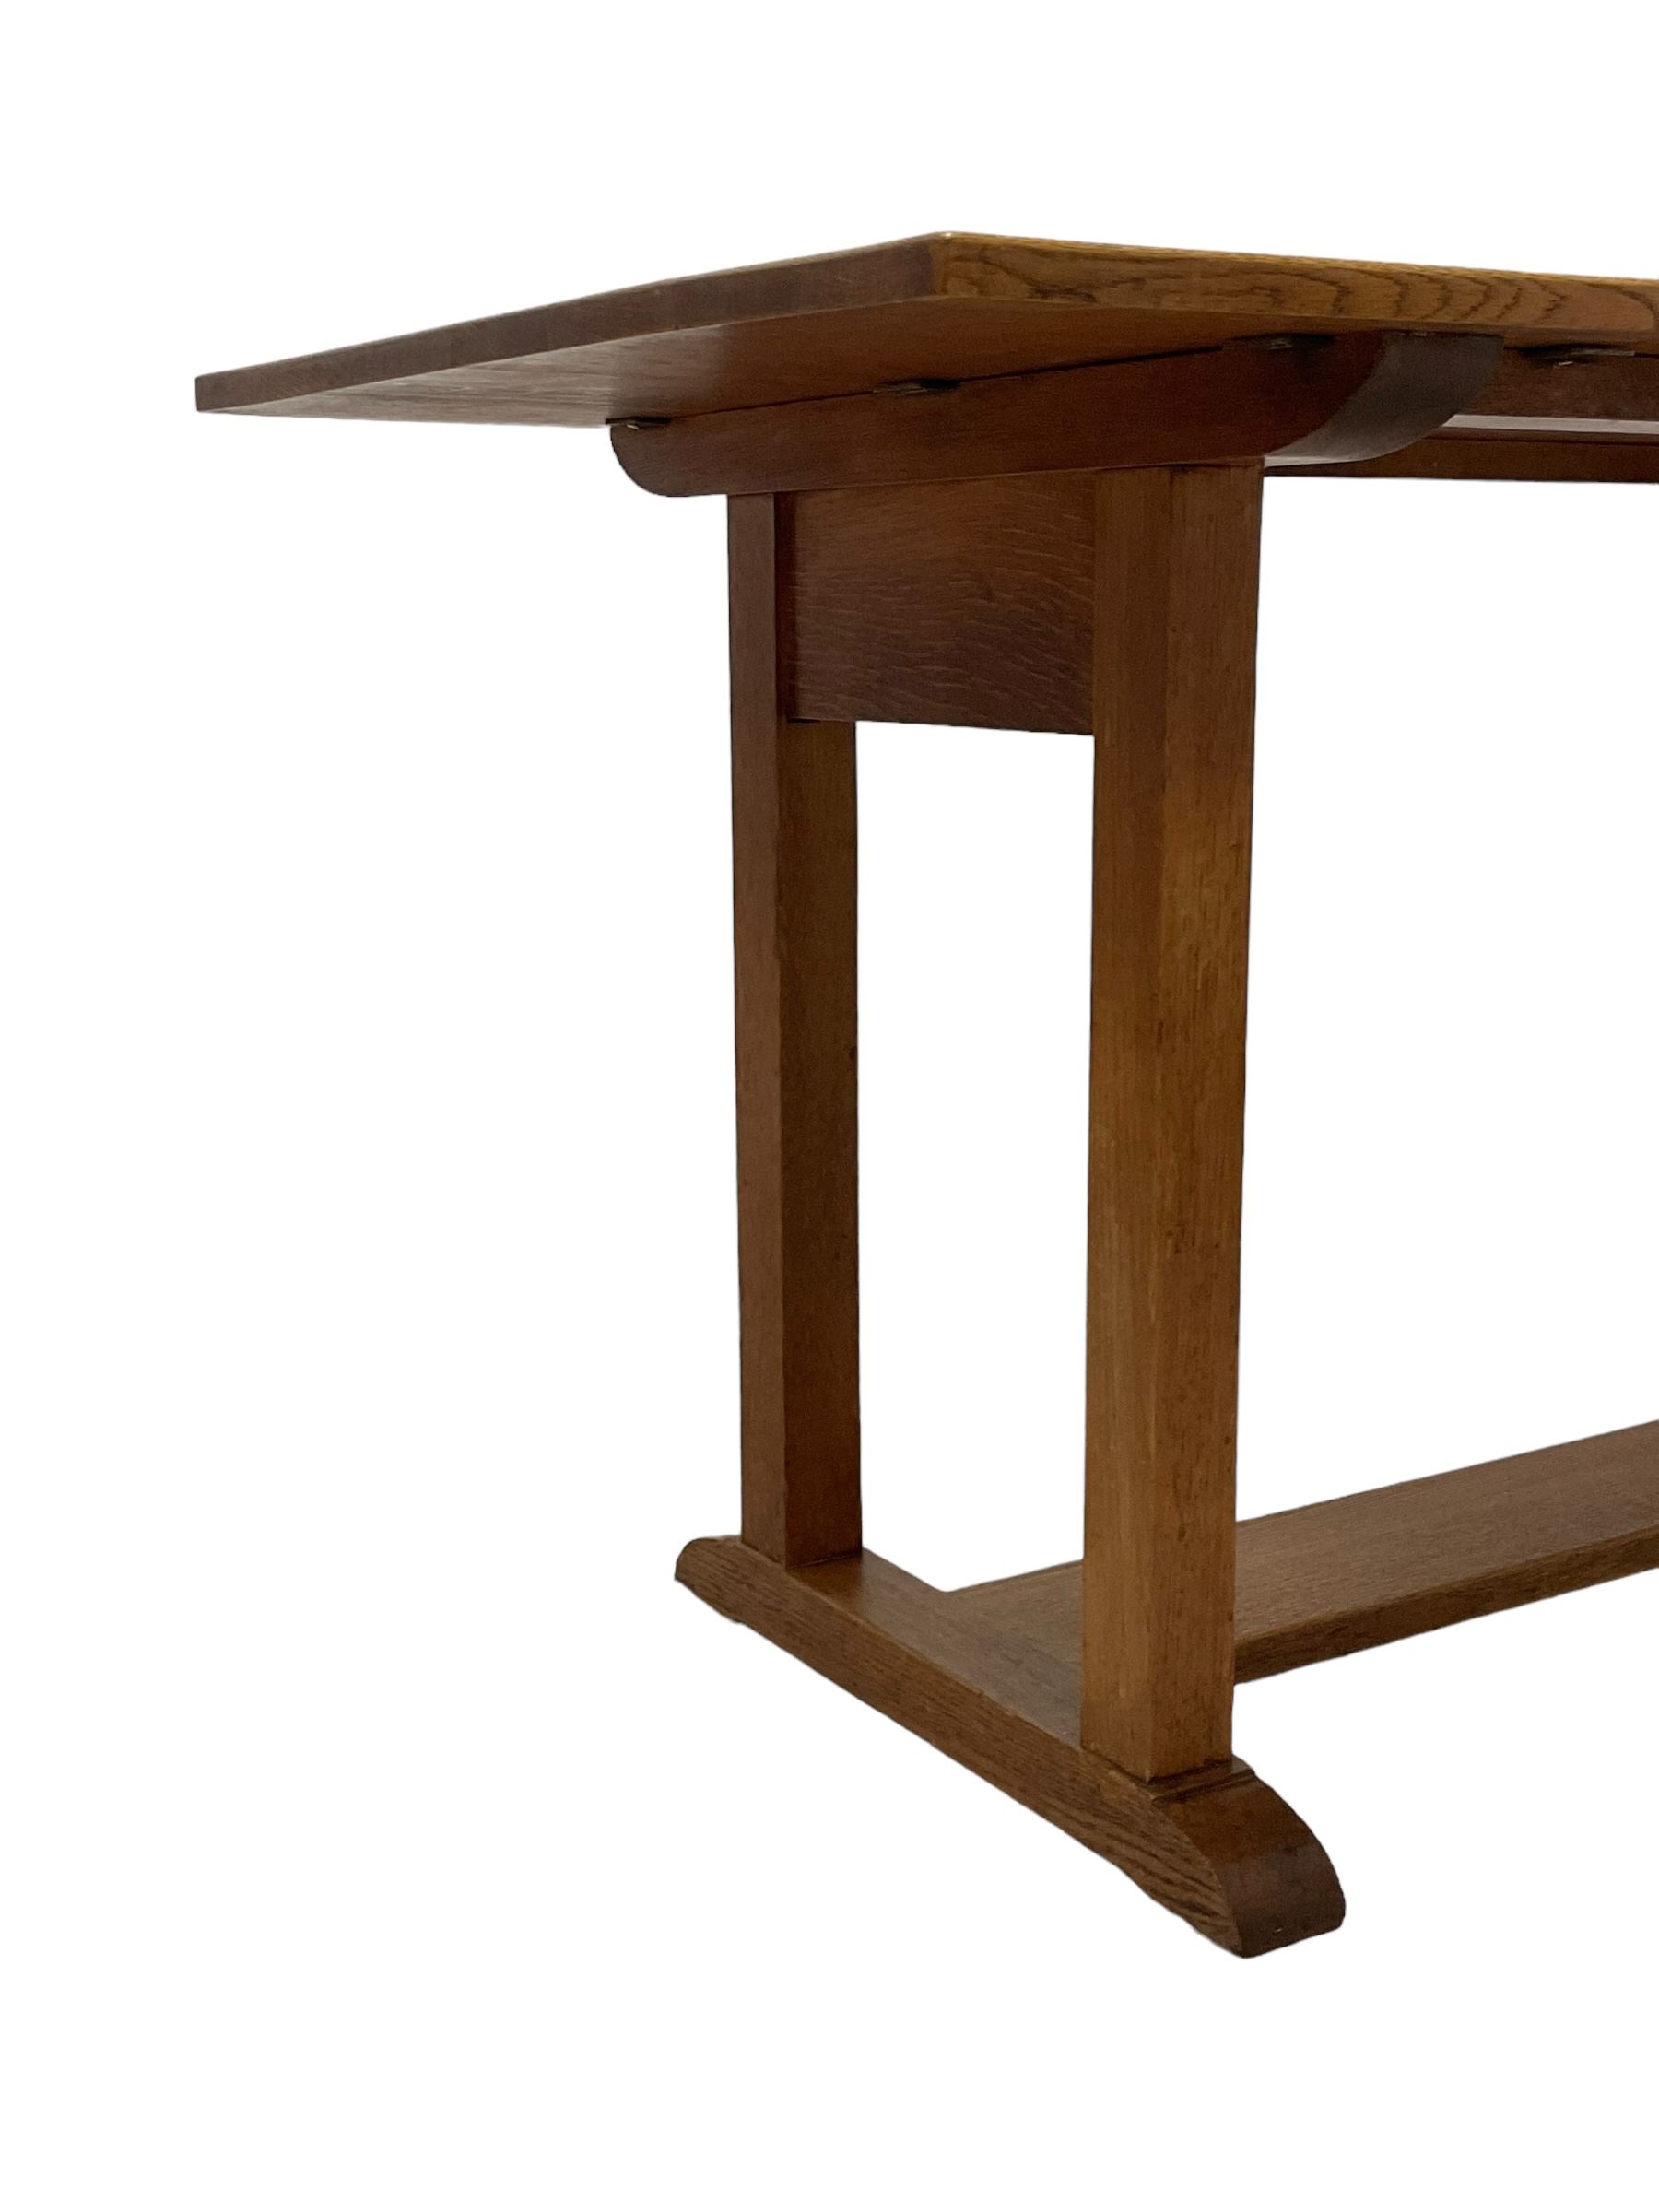 Gordon Russell - circa. 1930s oak refectory dining table - Image 3 of 9